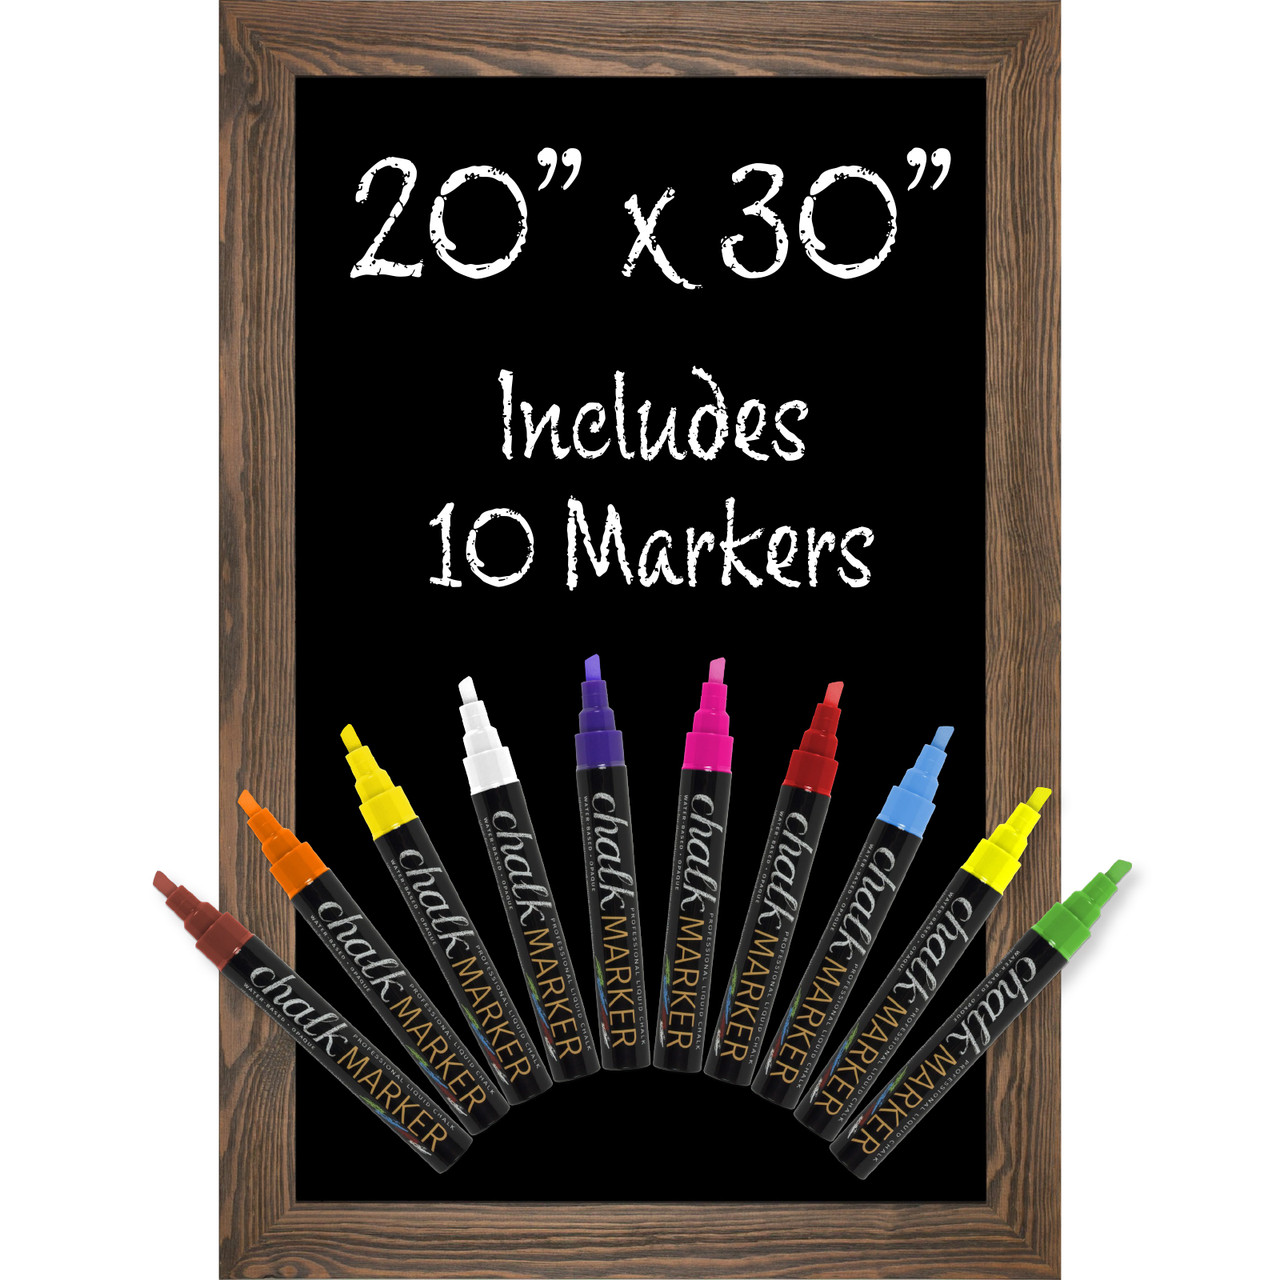 Rustic Brown Magnetic Wall Chalkboard Sign: Includes 10 Liquid Chalk Markers 20x30 Wooden Hanging Chalk Sign for Kitchen Wall Decor, Restaurant